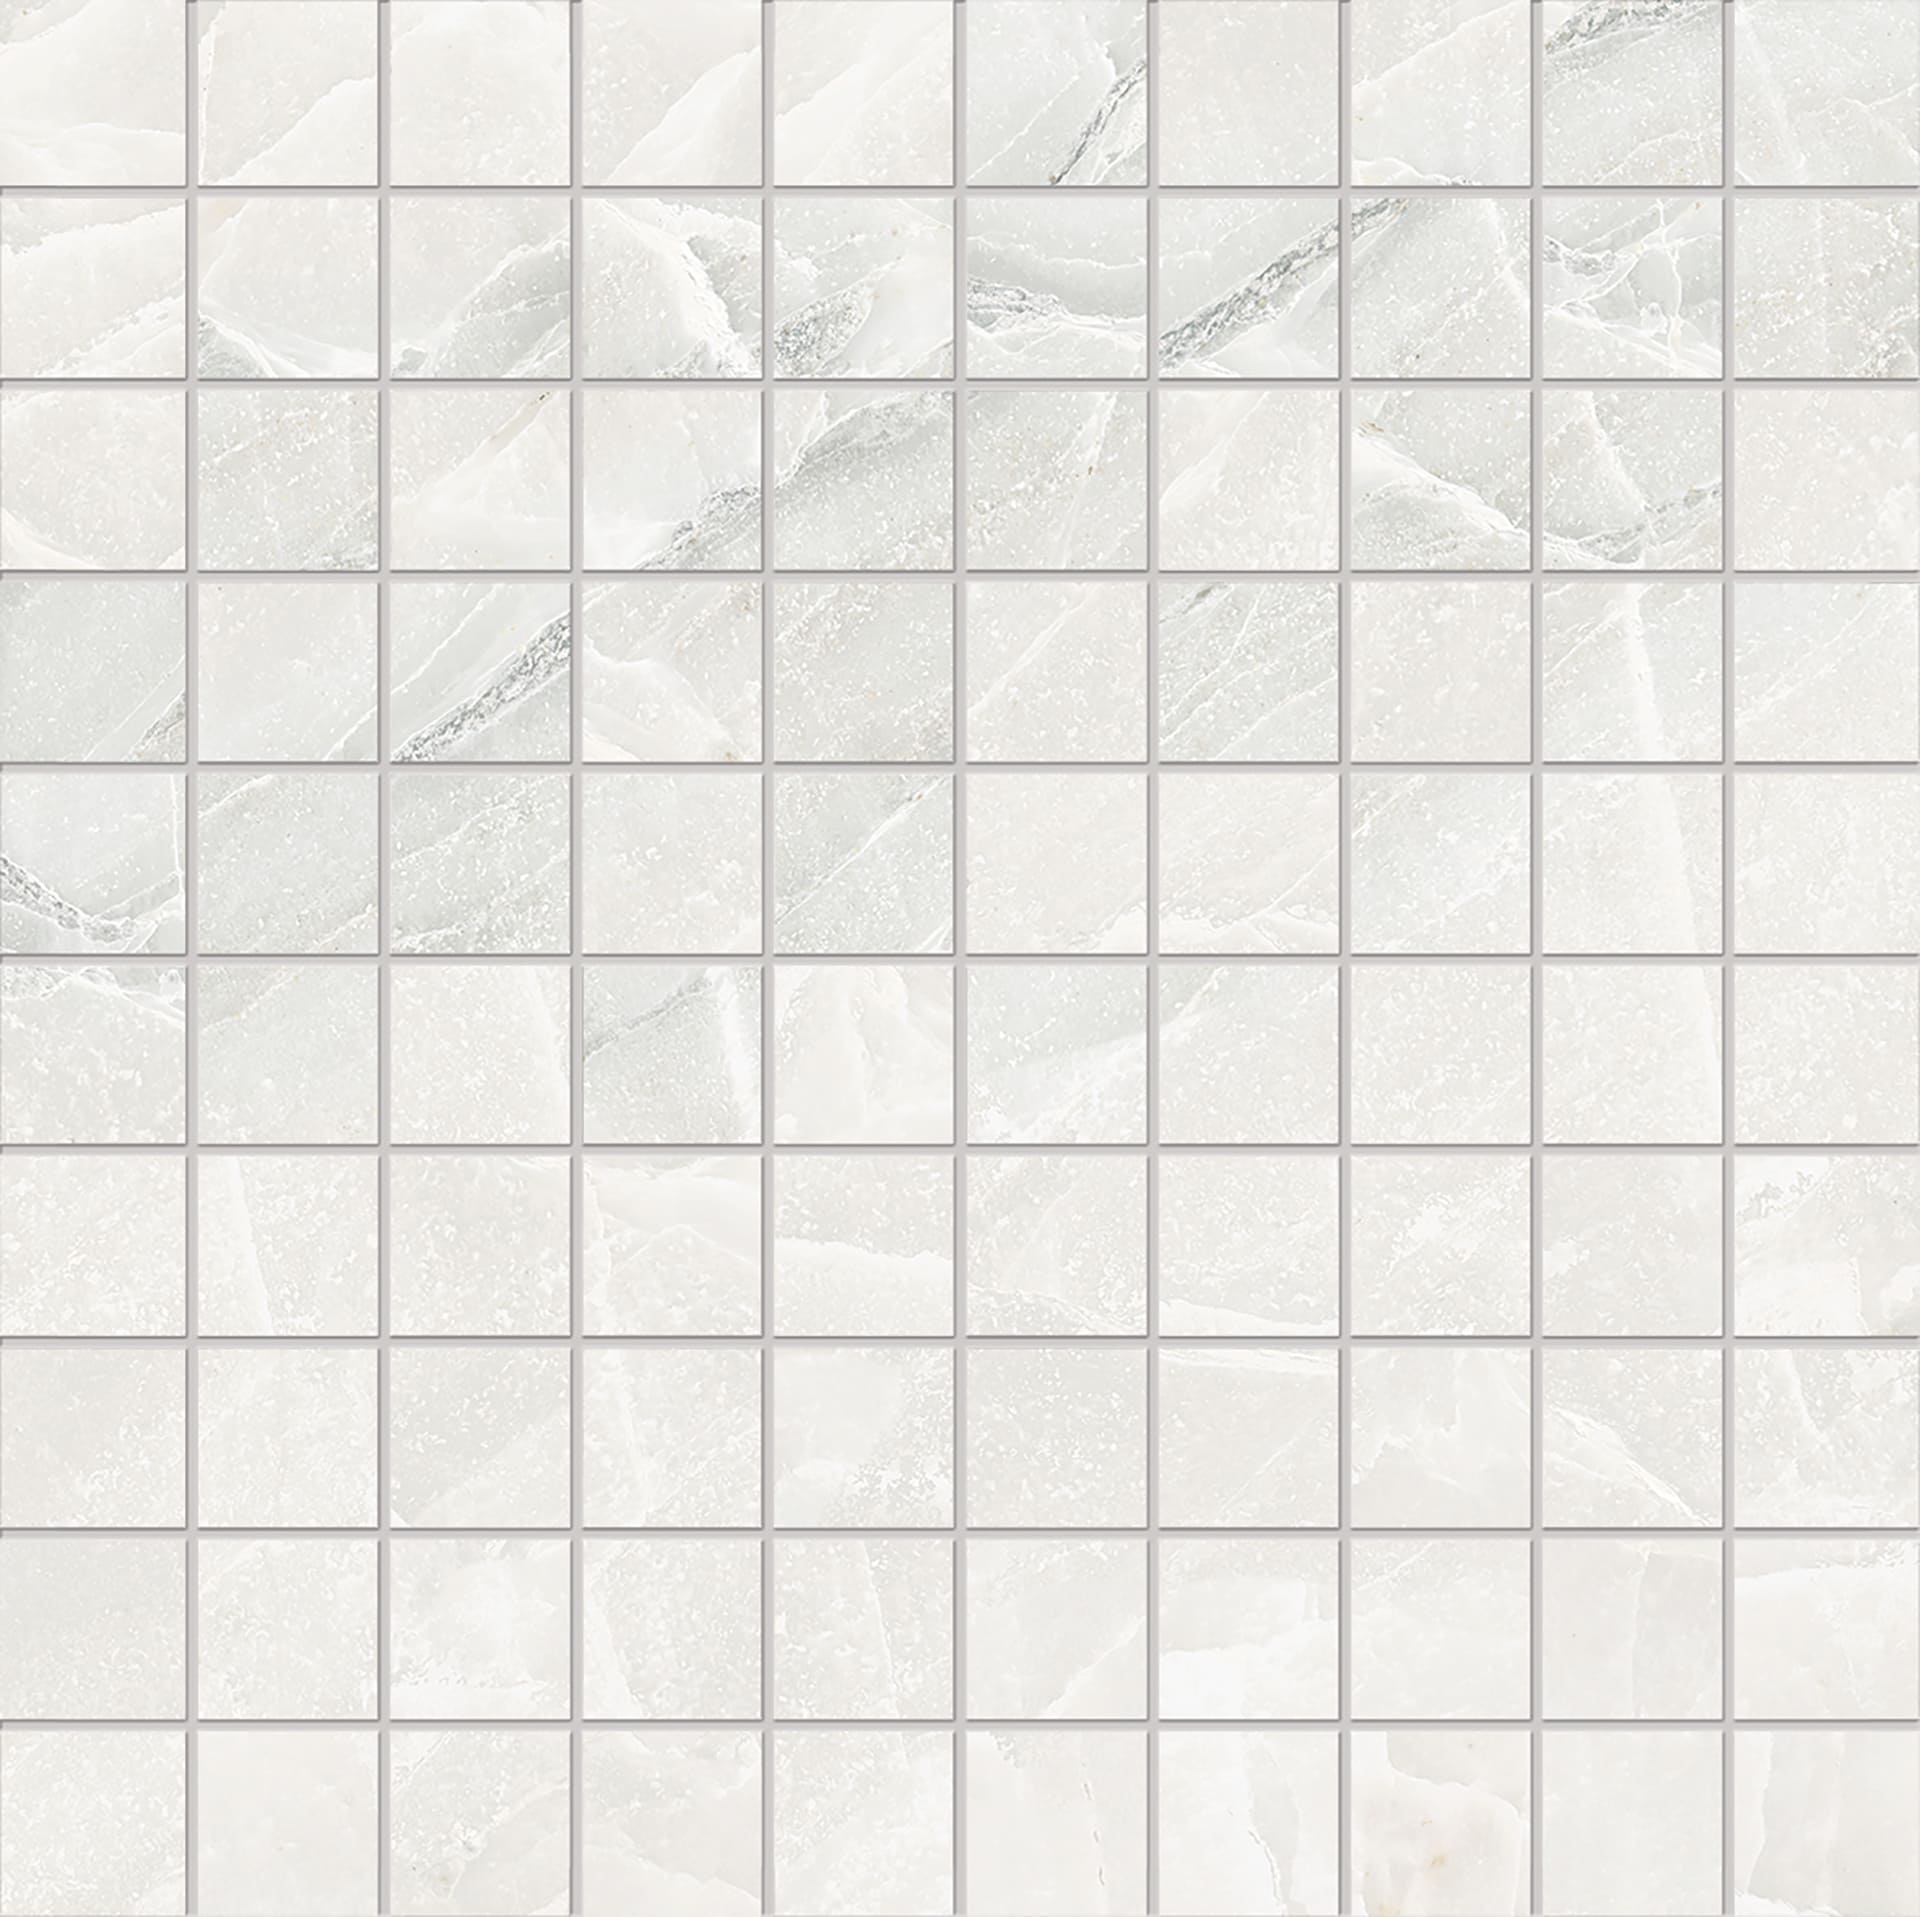 Tele Di Marmo Selection: Marble White Paradise Straight Stack 1x1 Mosaic (12"x12"x9.5-mm | matte)